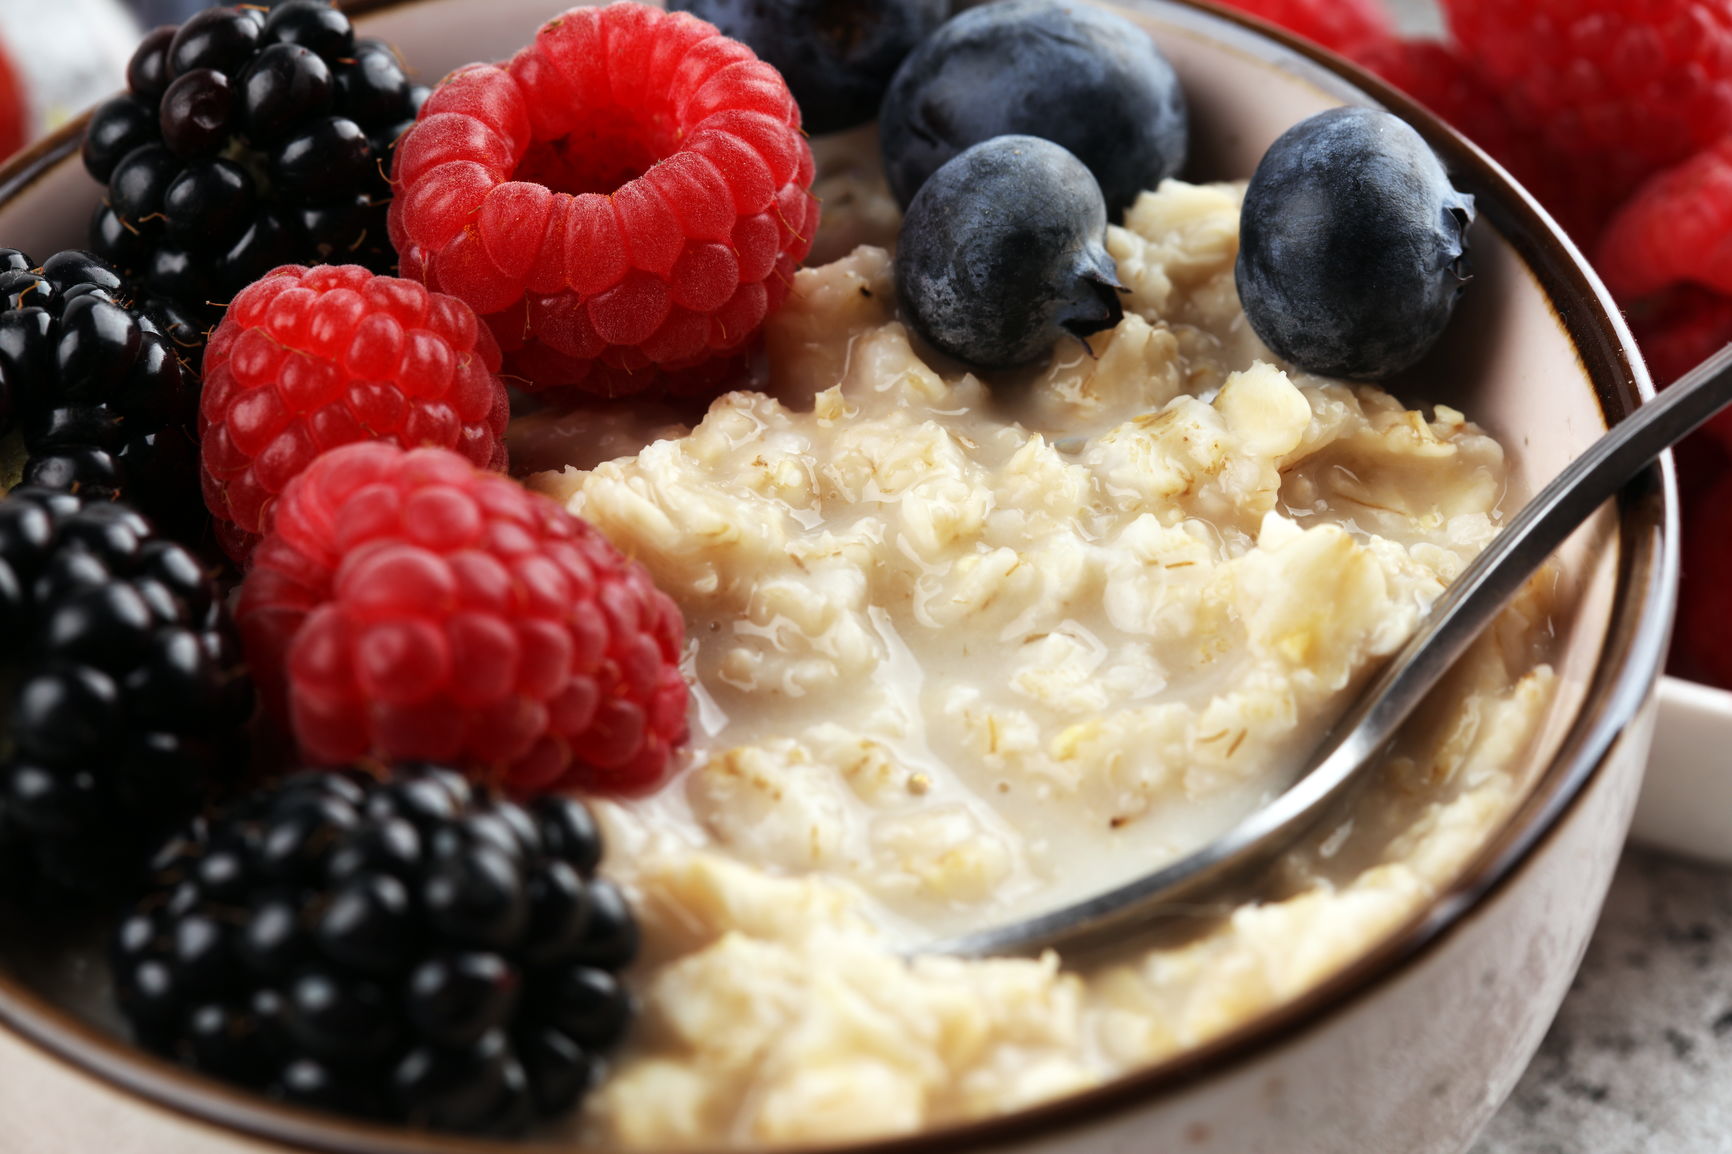 oatmeal gives you more energy in the morning